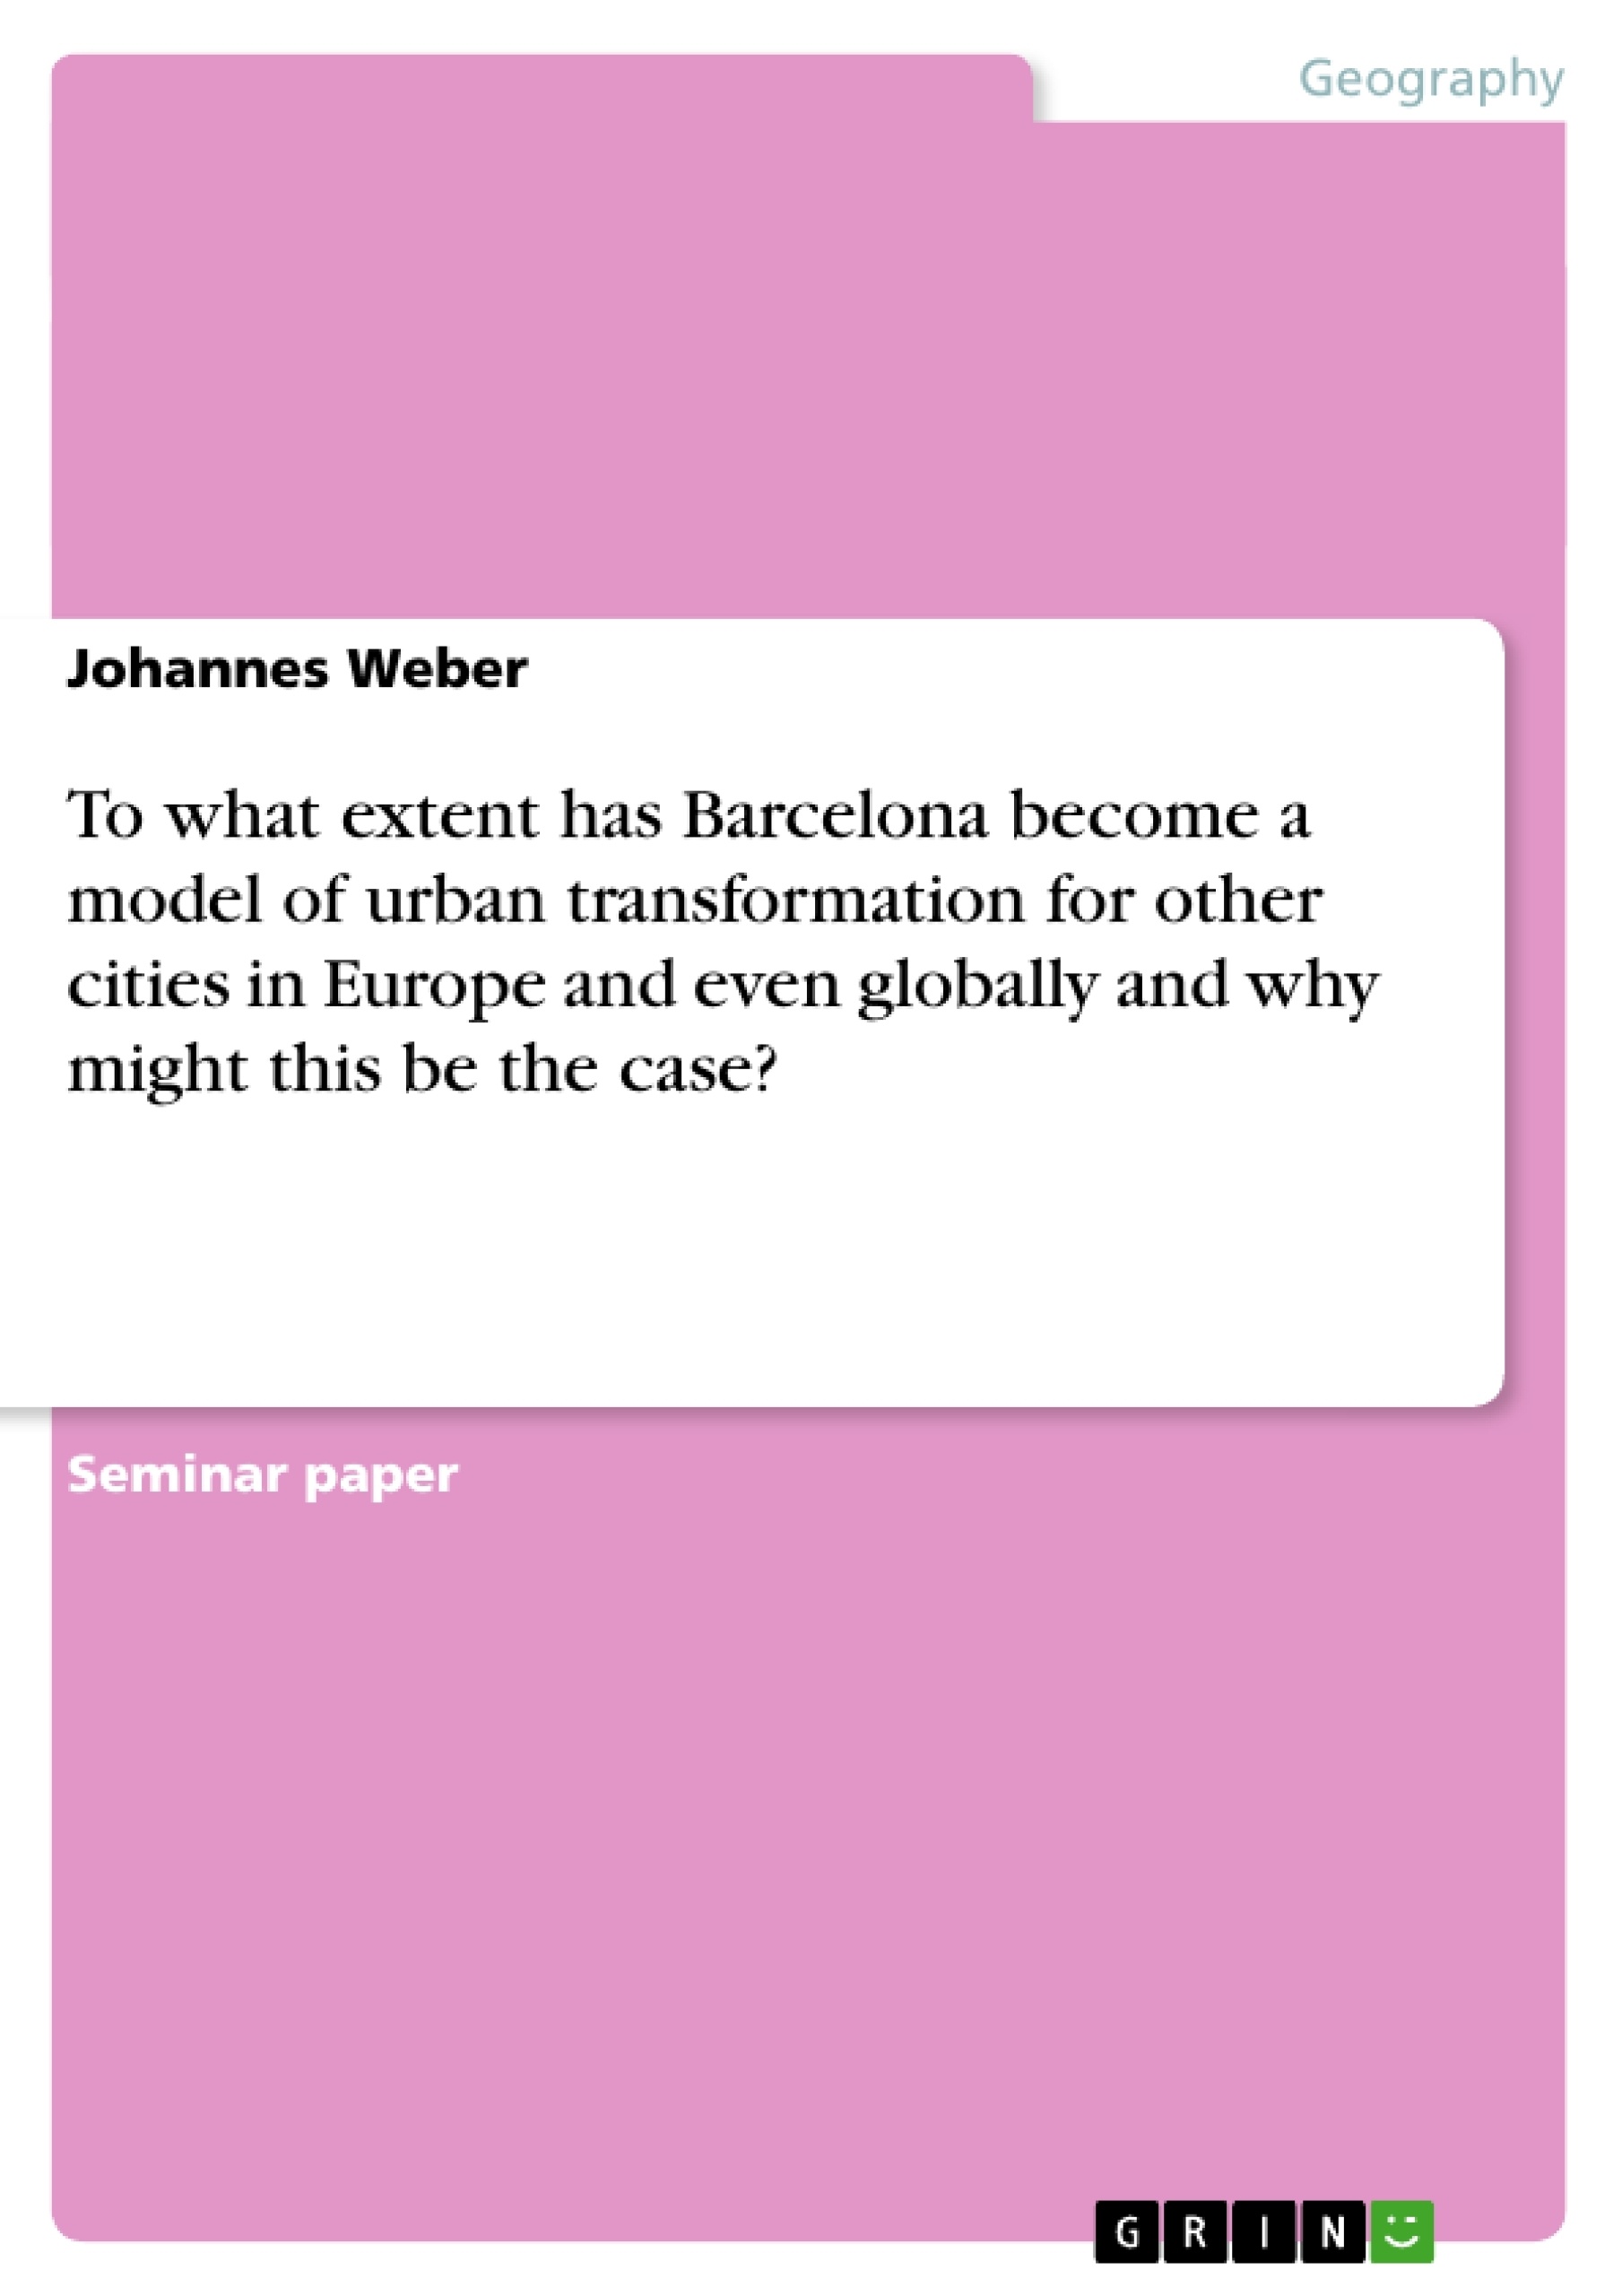 Titre: To what extent has Barcelona become a model of urban transformation for other cities in Europe and even globally and why might this be the case?